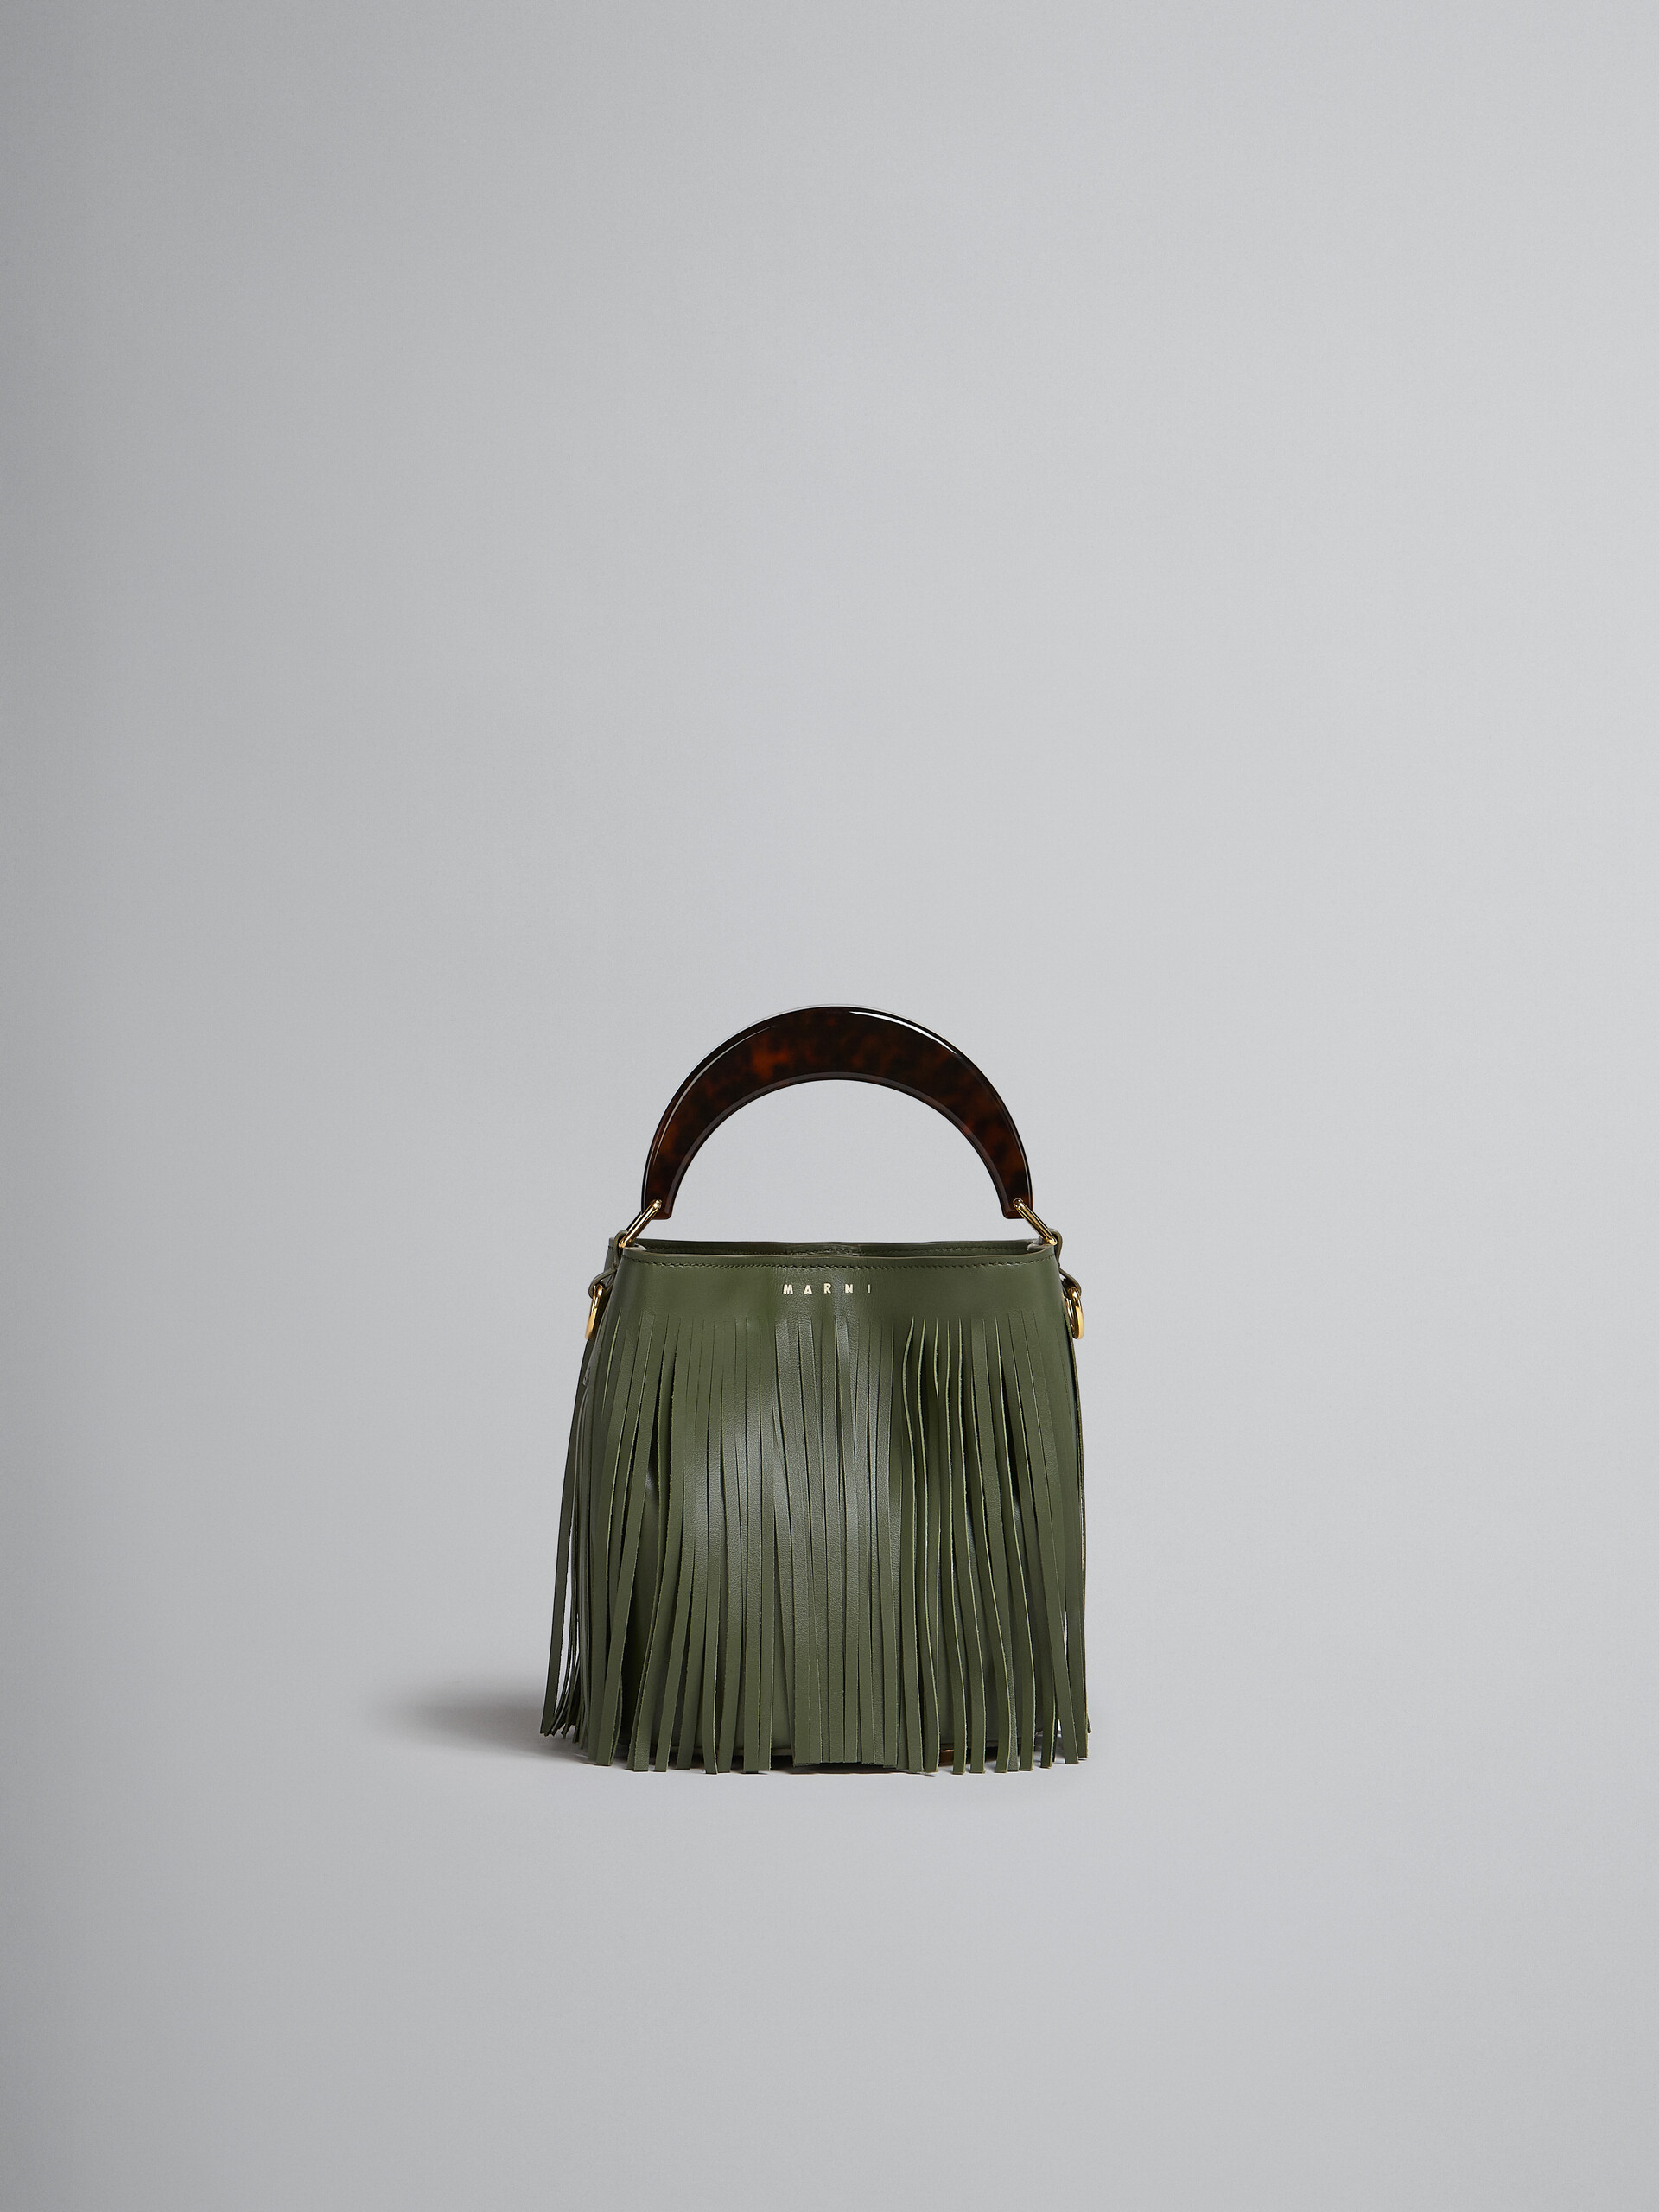 Venice Small Bucket in green leather with fringes - Shoulder Bags - Image 1